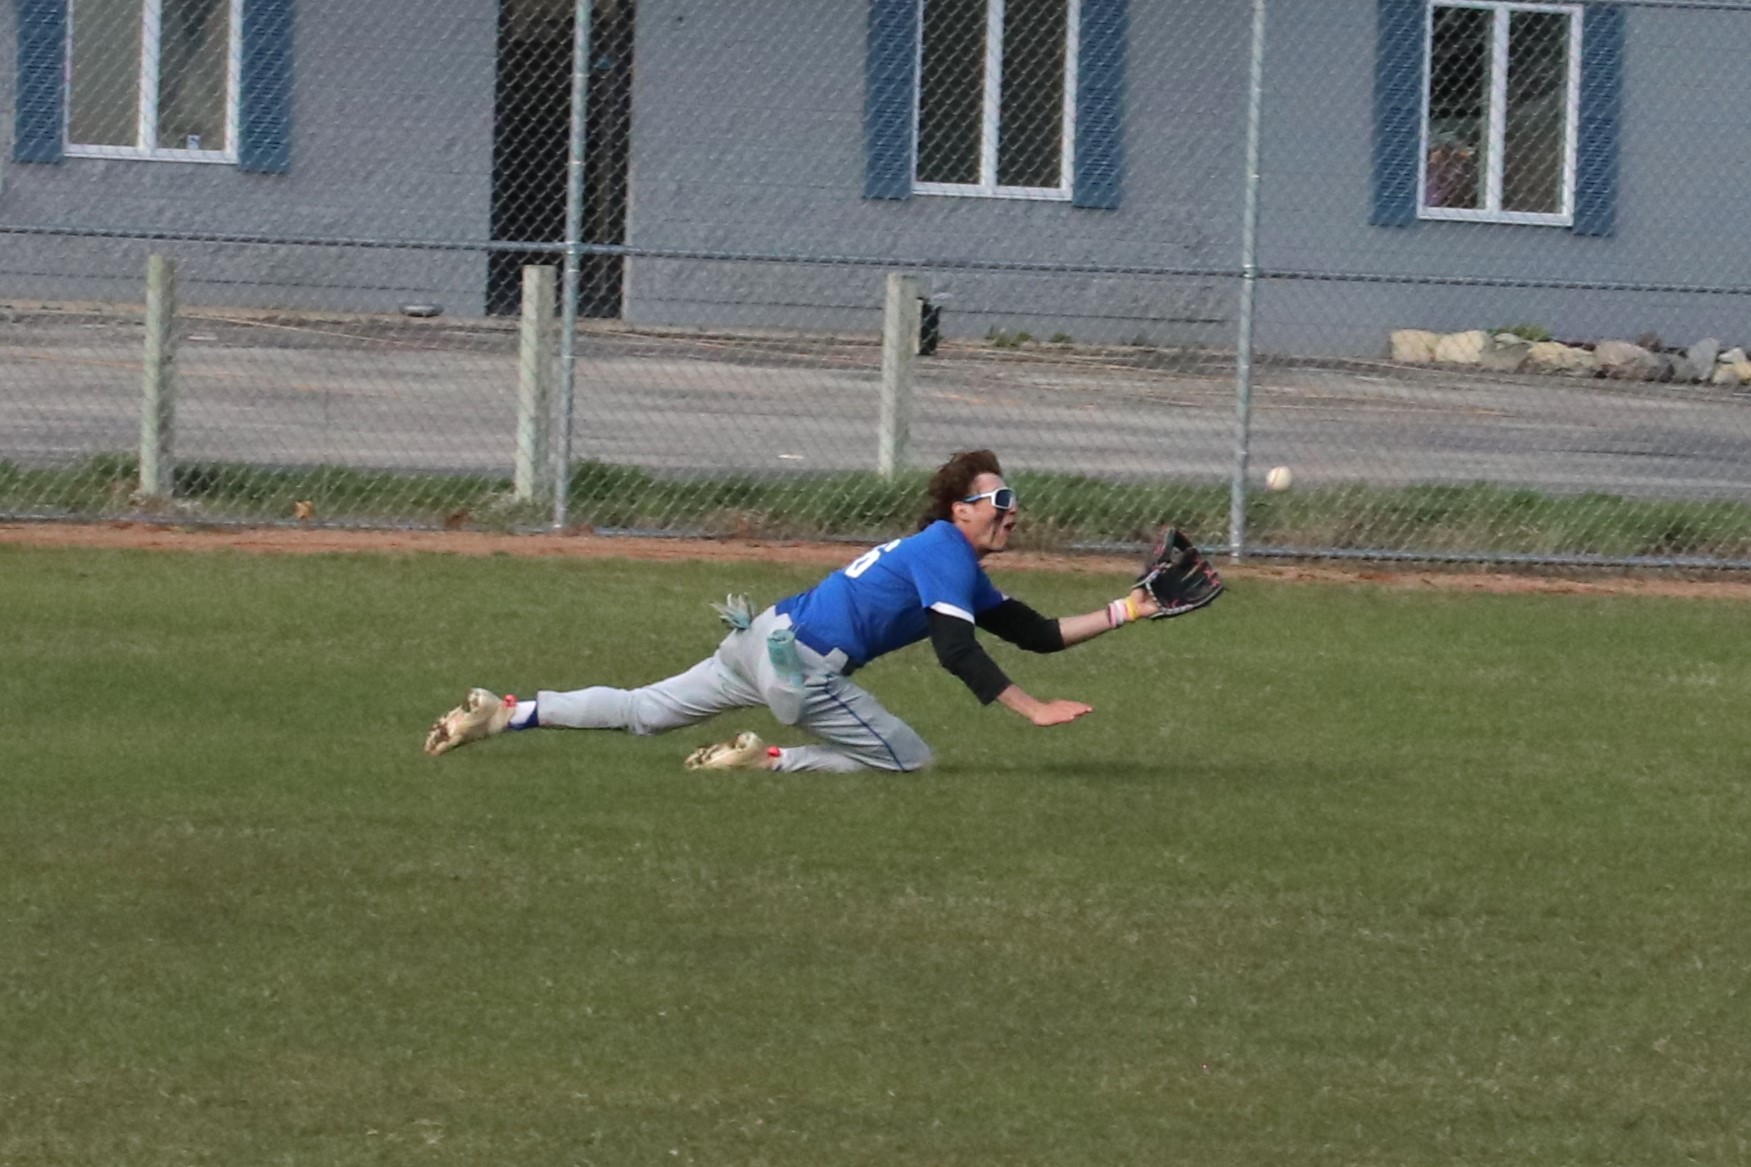 Jace Cota sliding in the outfield, he is reaching for a ball he is about to catch